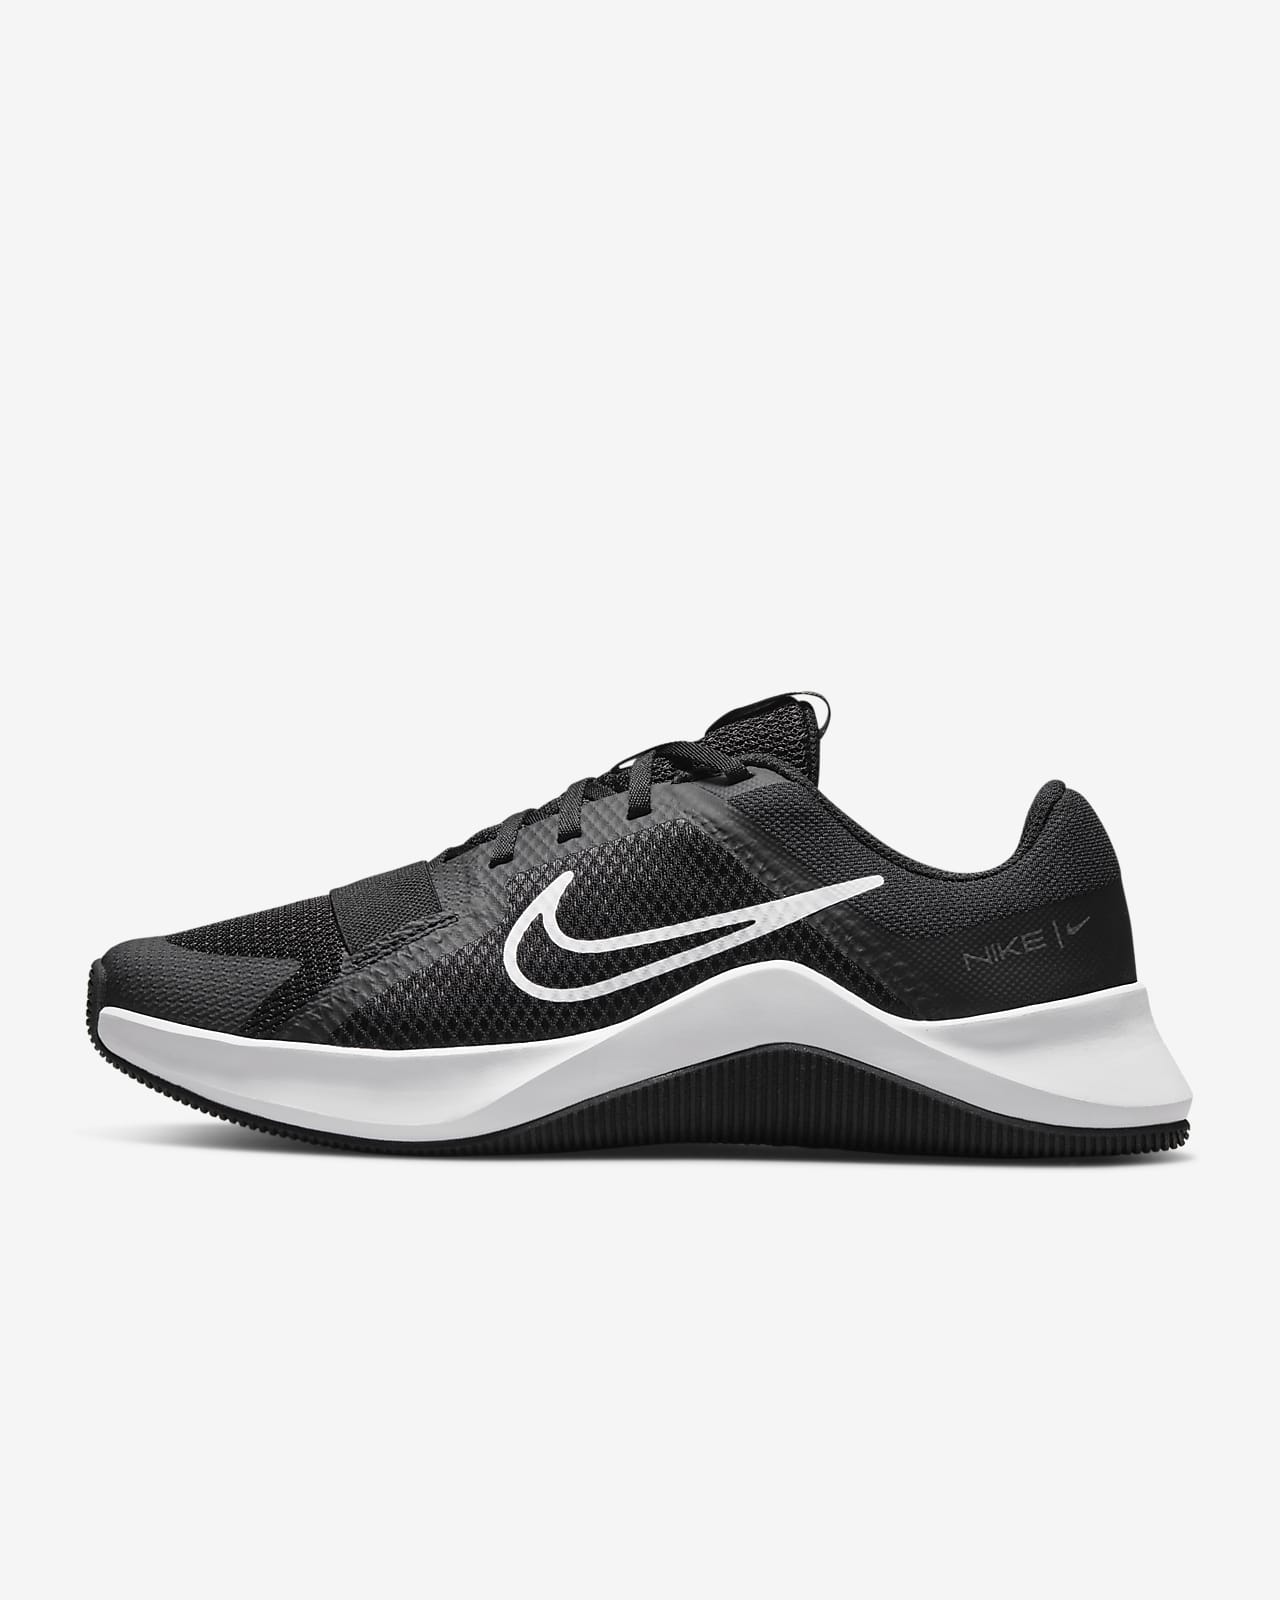 Nike MC Trainer 2 Women's Workout Shoes